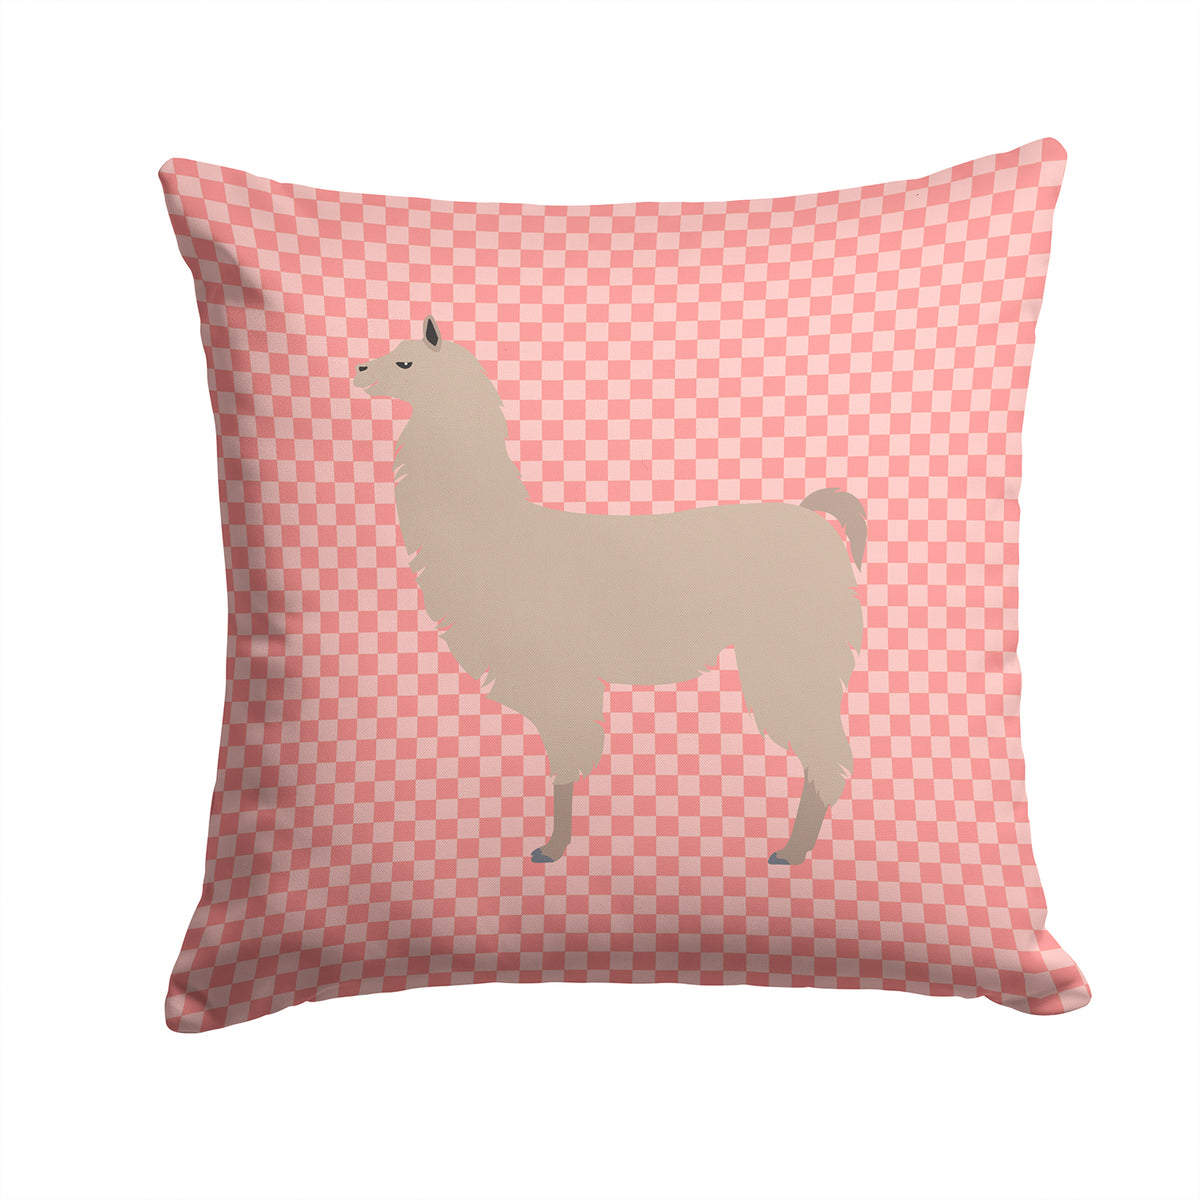 Llama Pink Check Fabric Decorative Pillow BB7916PW1414 - the-store.com